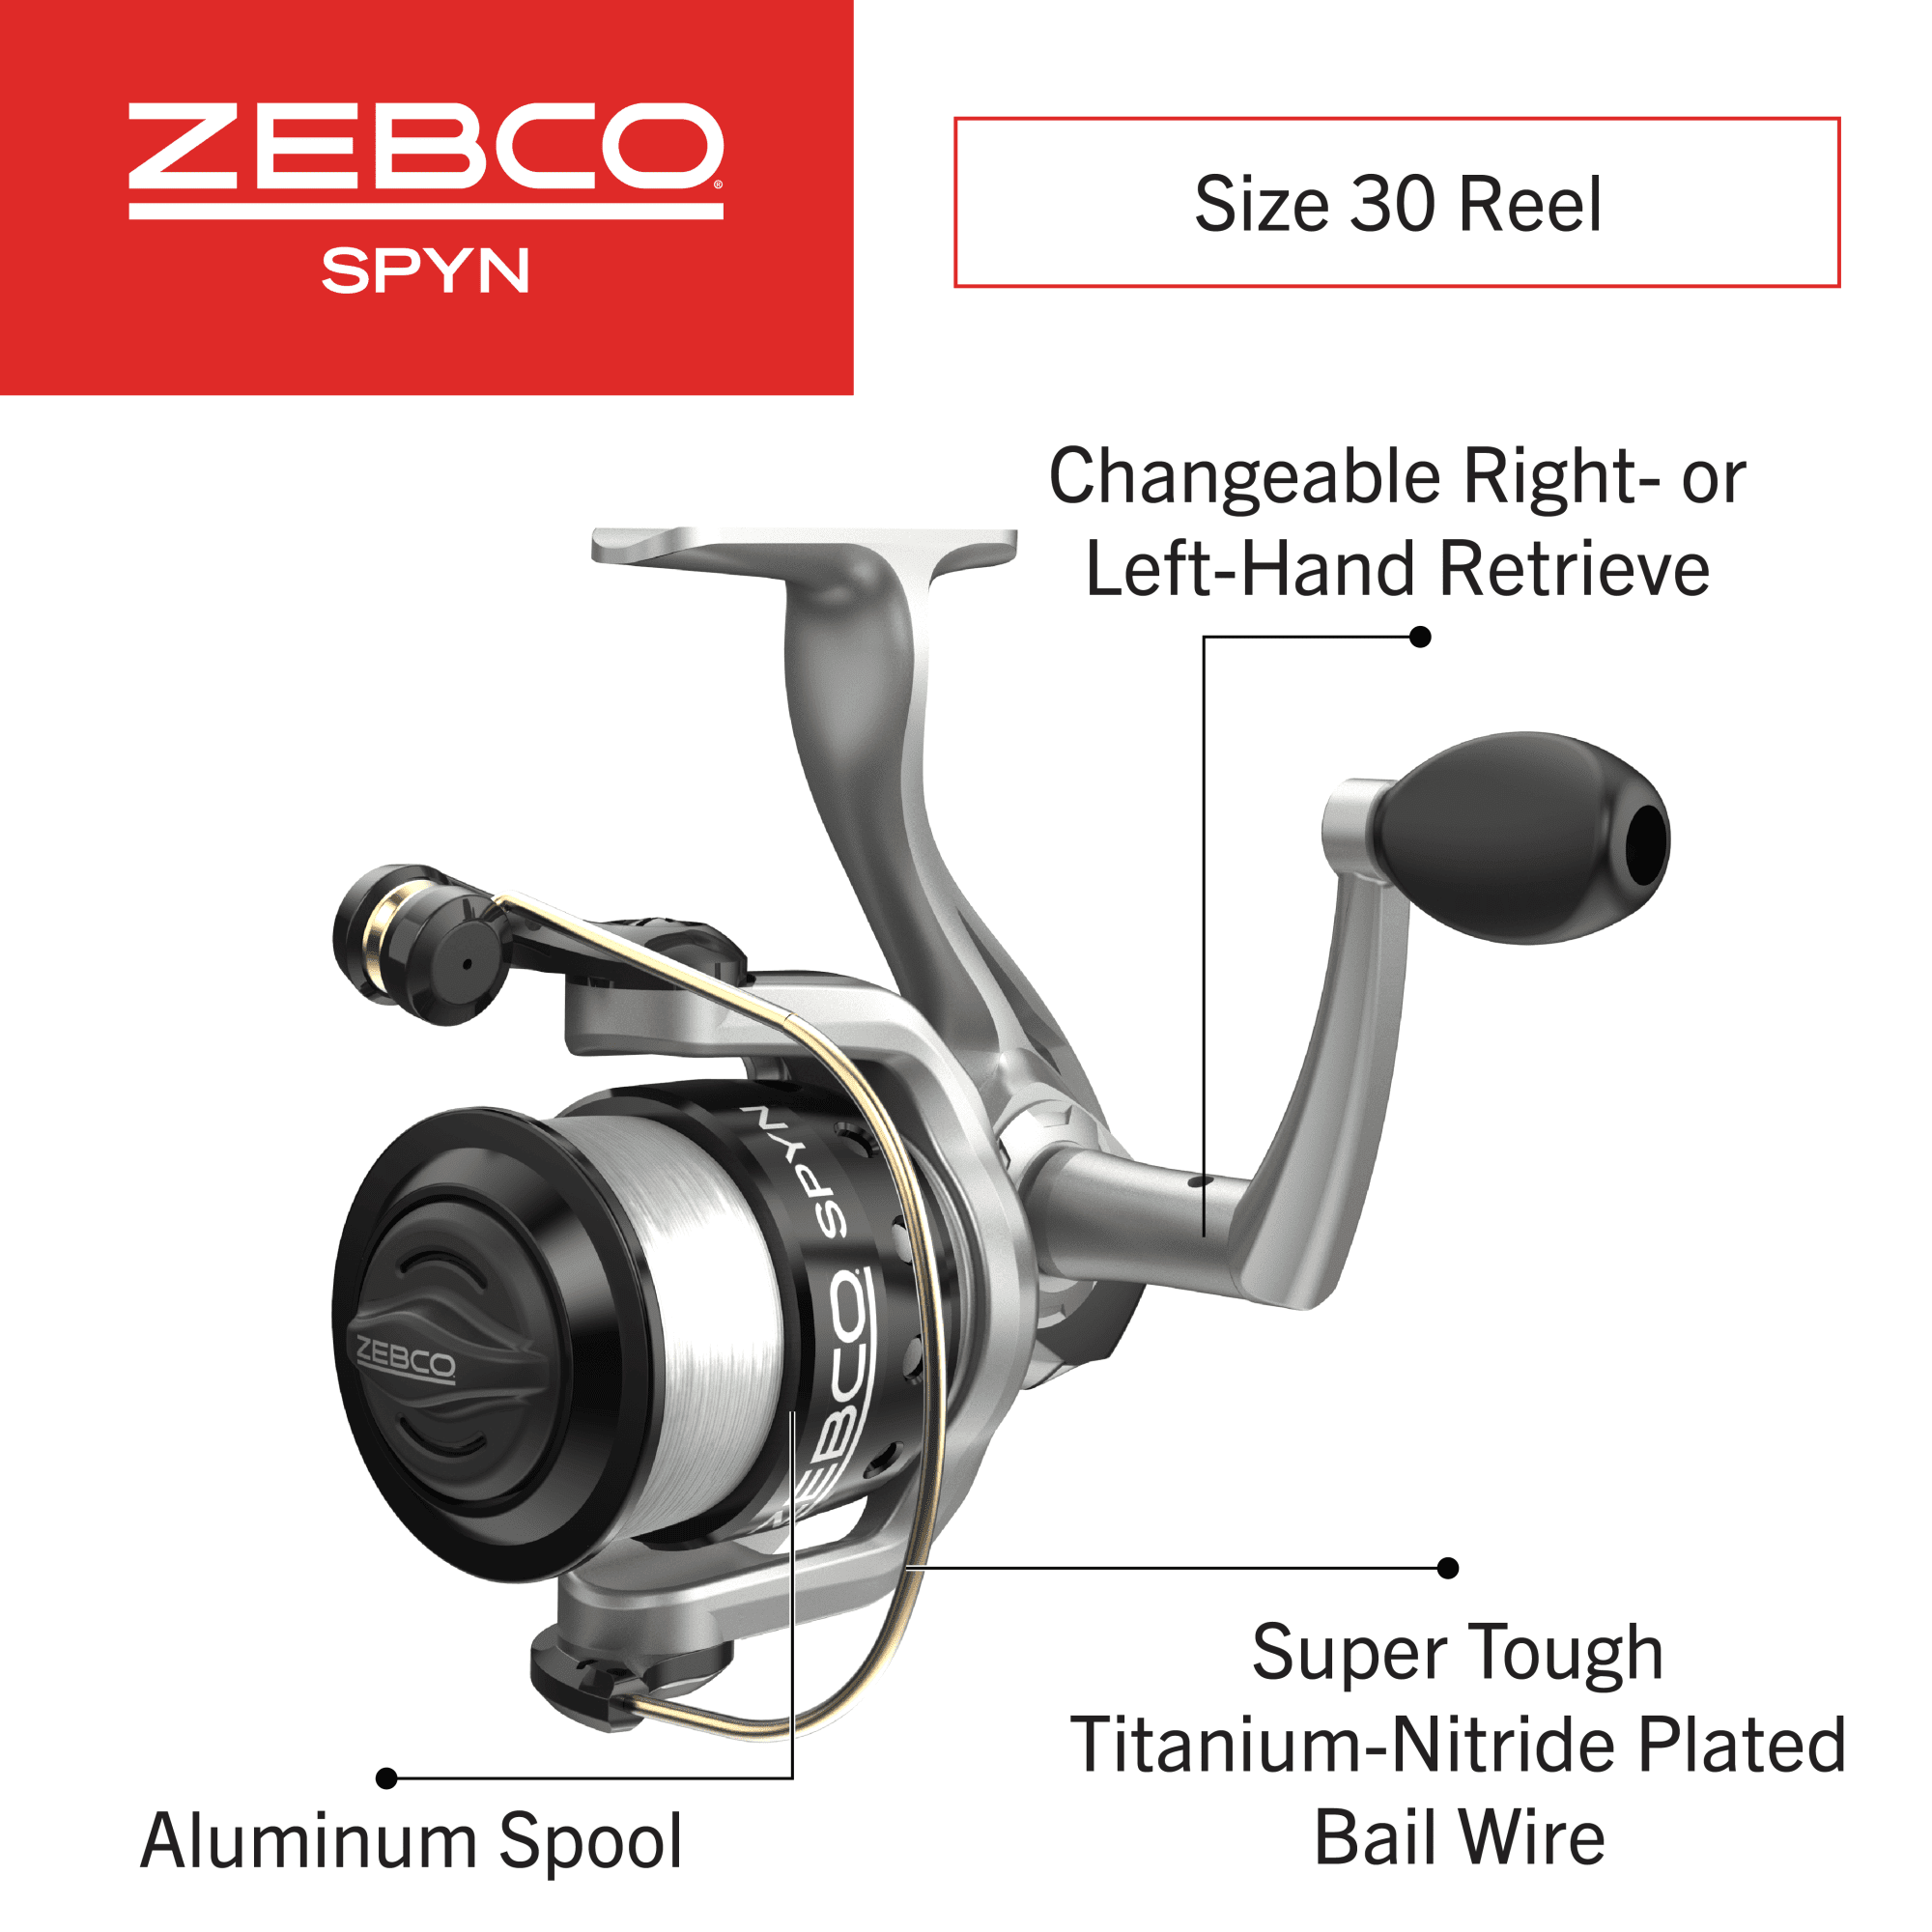 Zebco Spyn Spinning Fishing Reel, Size 30 Reel, Aluminum Spool, Super Tough  Titanium-Nitride Plated Bail Wire, 5.3:1 Gear Ratio, Pre-Spooled with  10-Pound Zebco Line, Silver/Black 